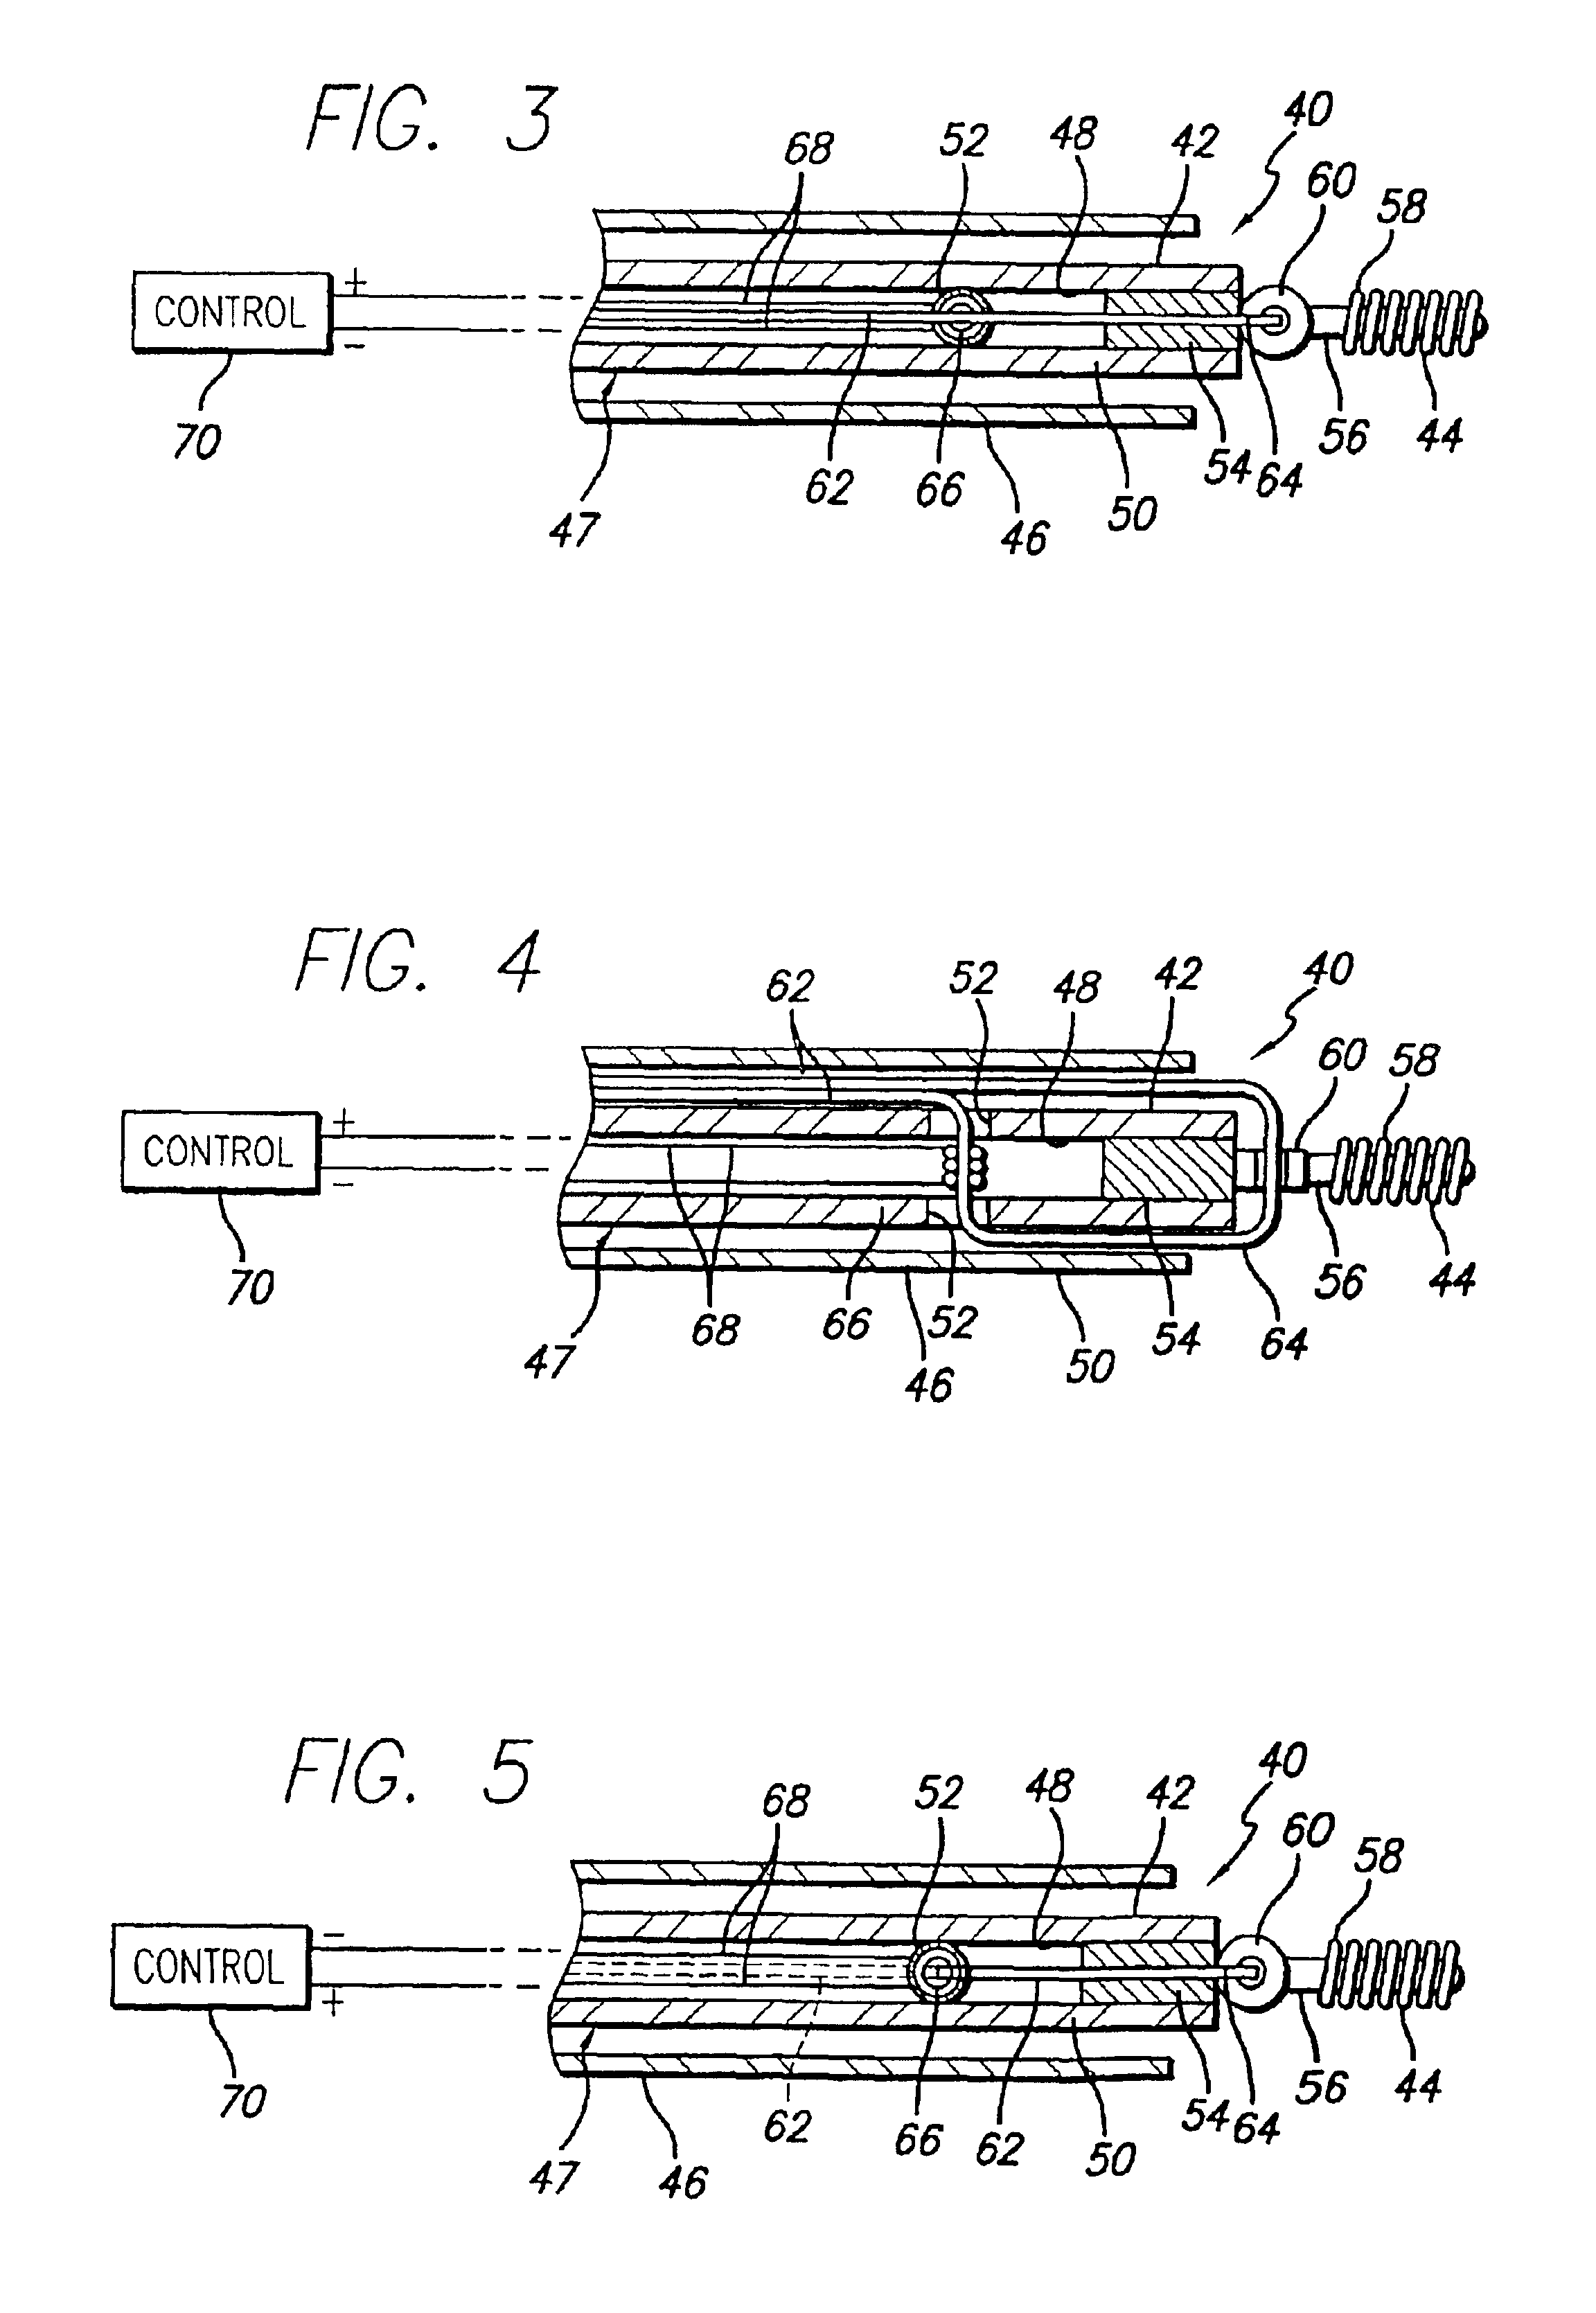 Apparatus for deployment of micro-coil using a catheter